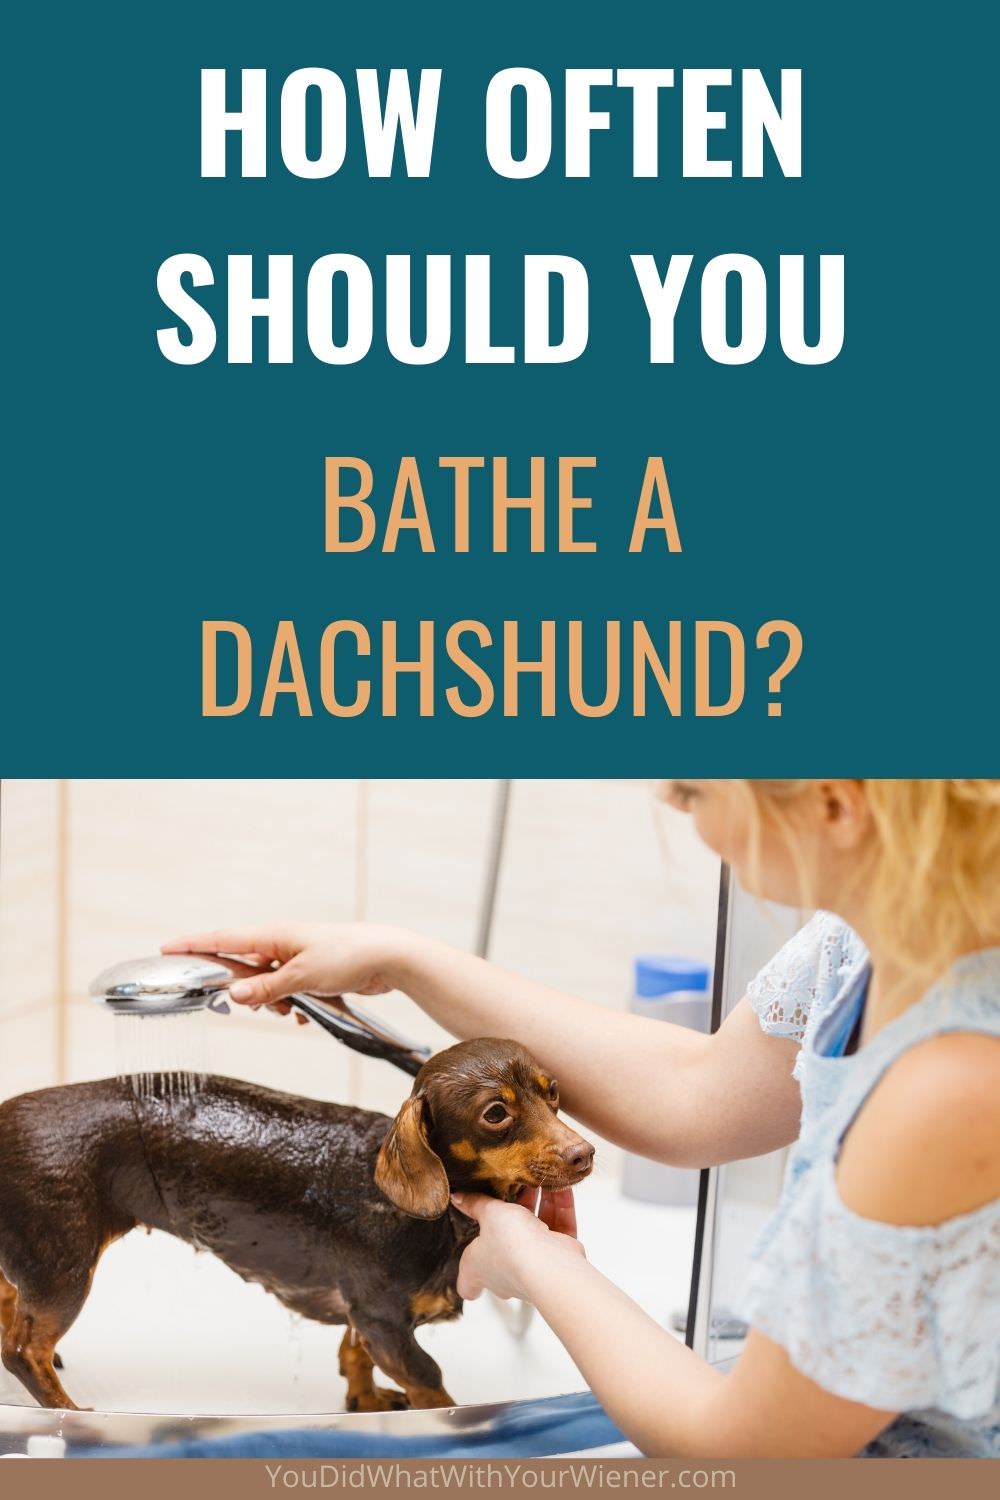 Do you need to wash your dog every day? Here is how often to bathe a dachshund.